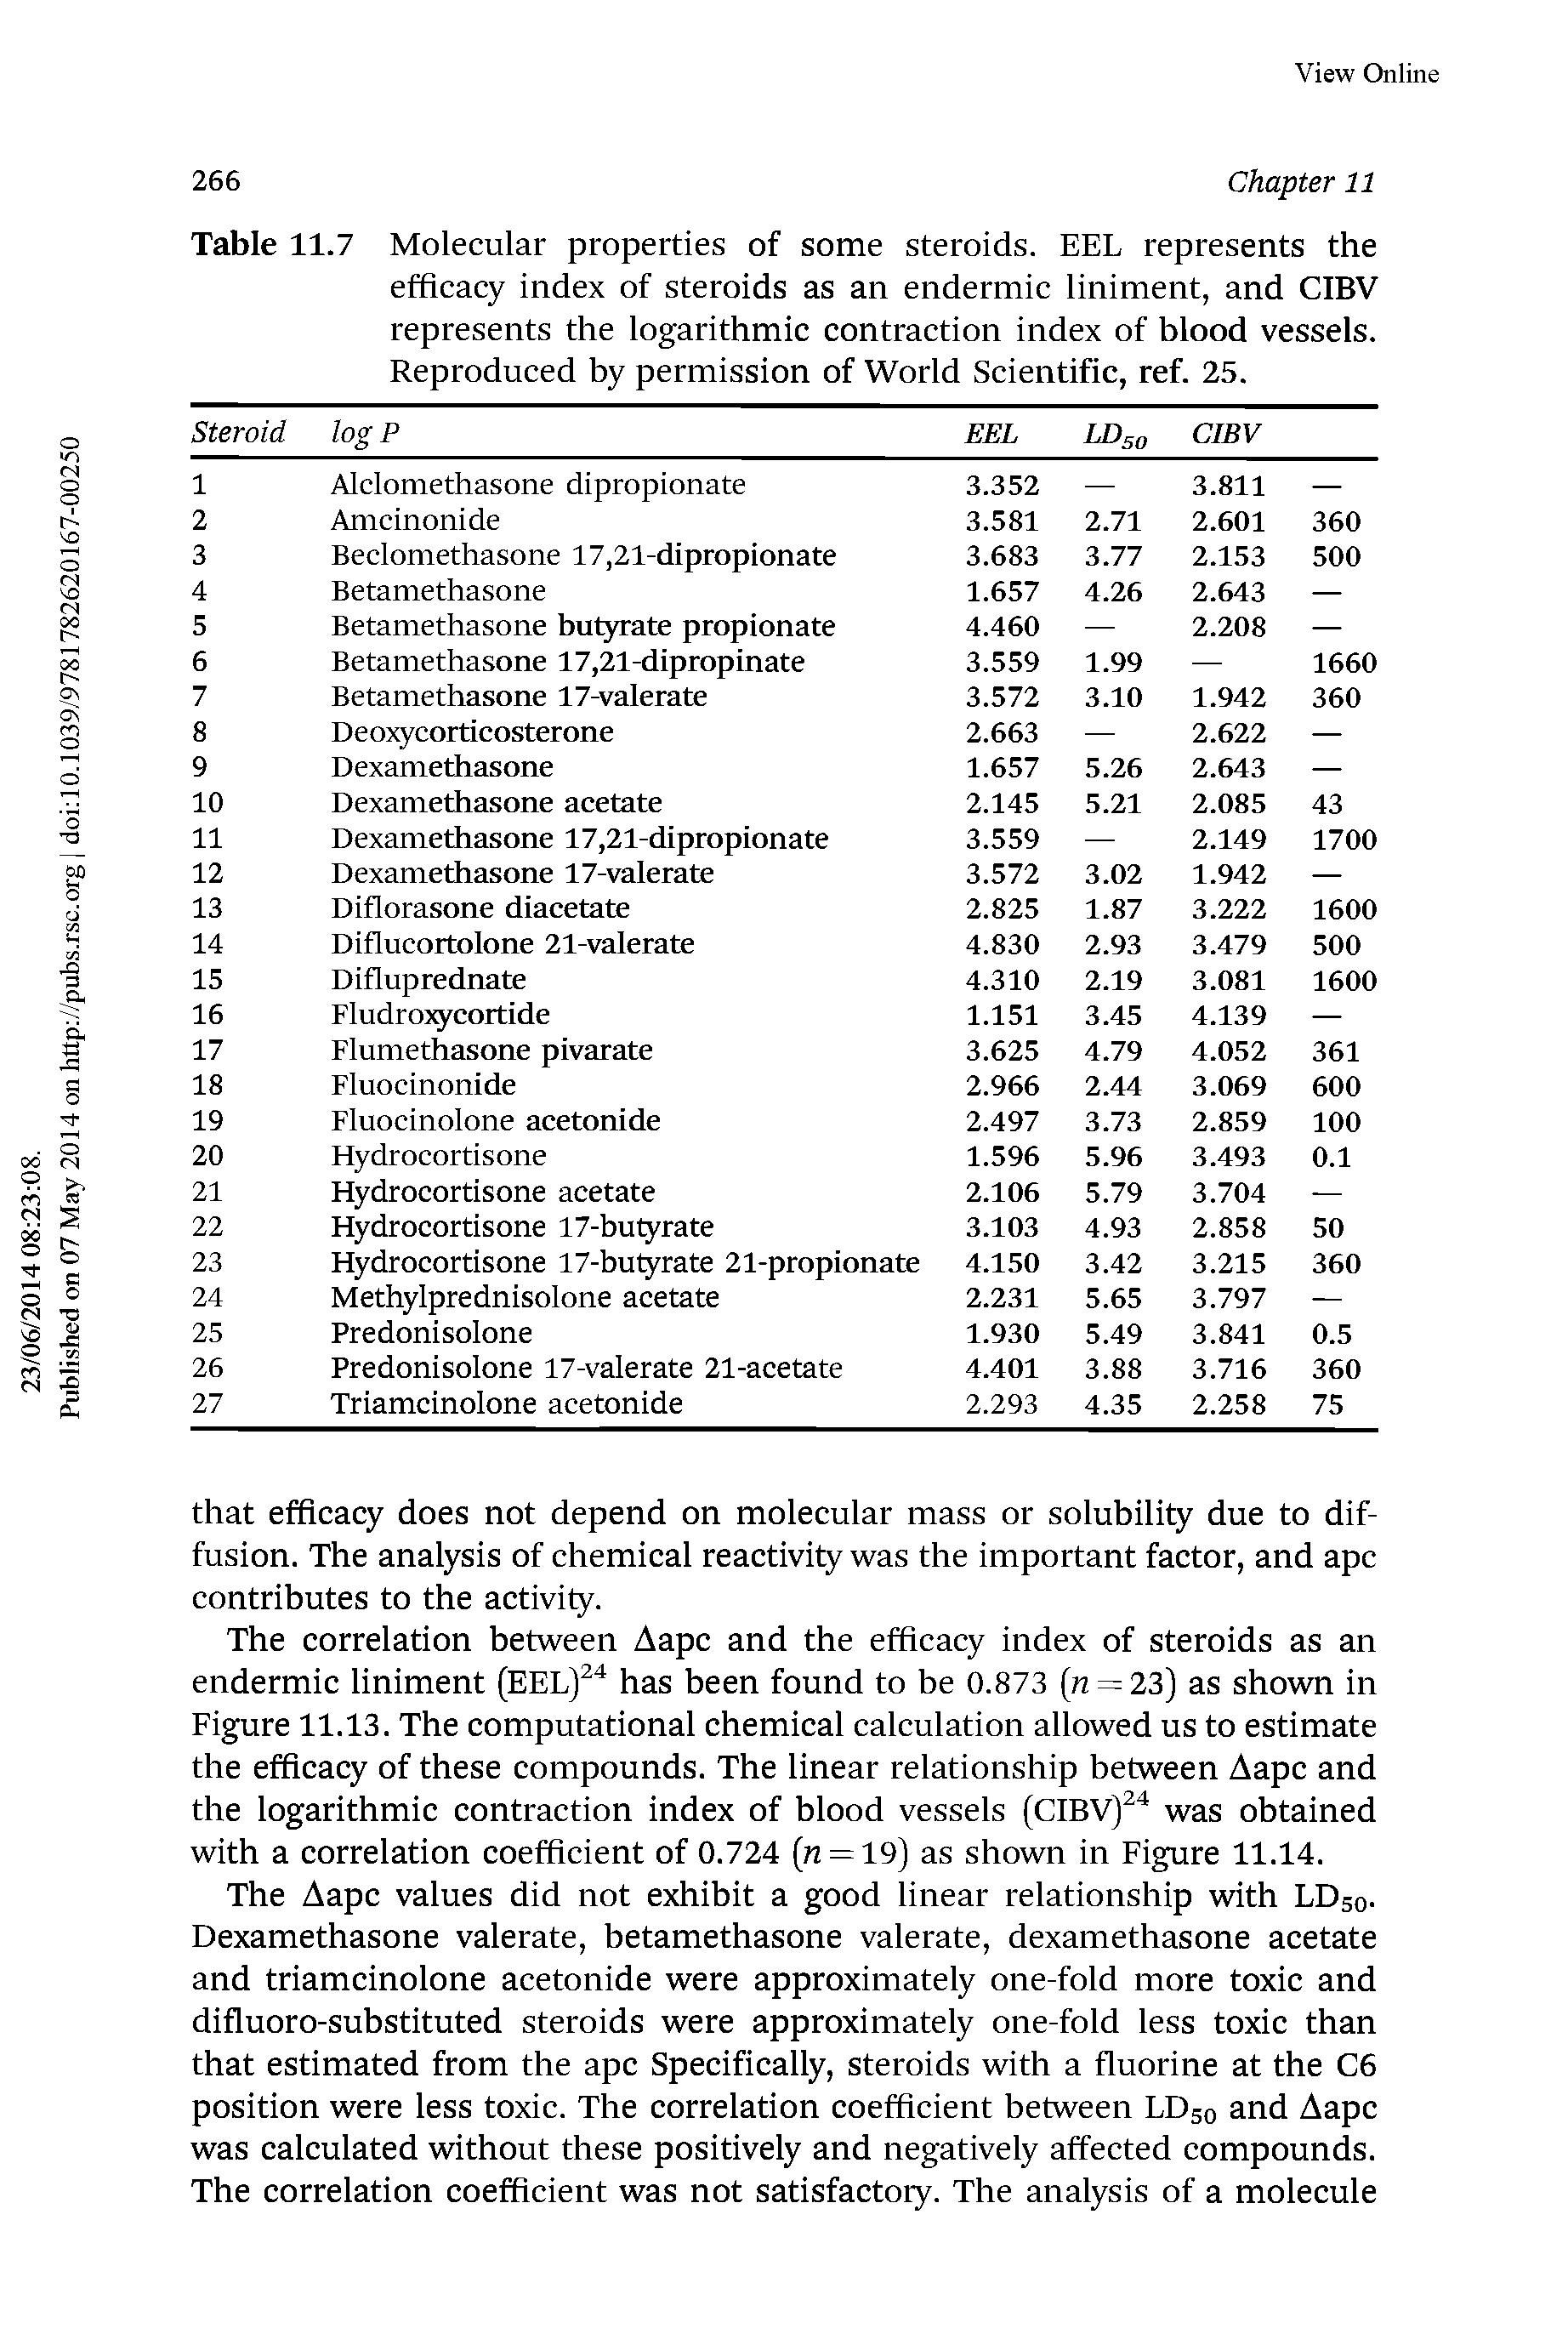 Table 11.7 Molecular properties of some steroids. EEL represents the efficacy index of steroids as an endermic liniment, and CIBV represents the logarithmic contraction index of blood vessels. Reproduced by permission of World Scientific, ref. 25.